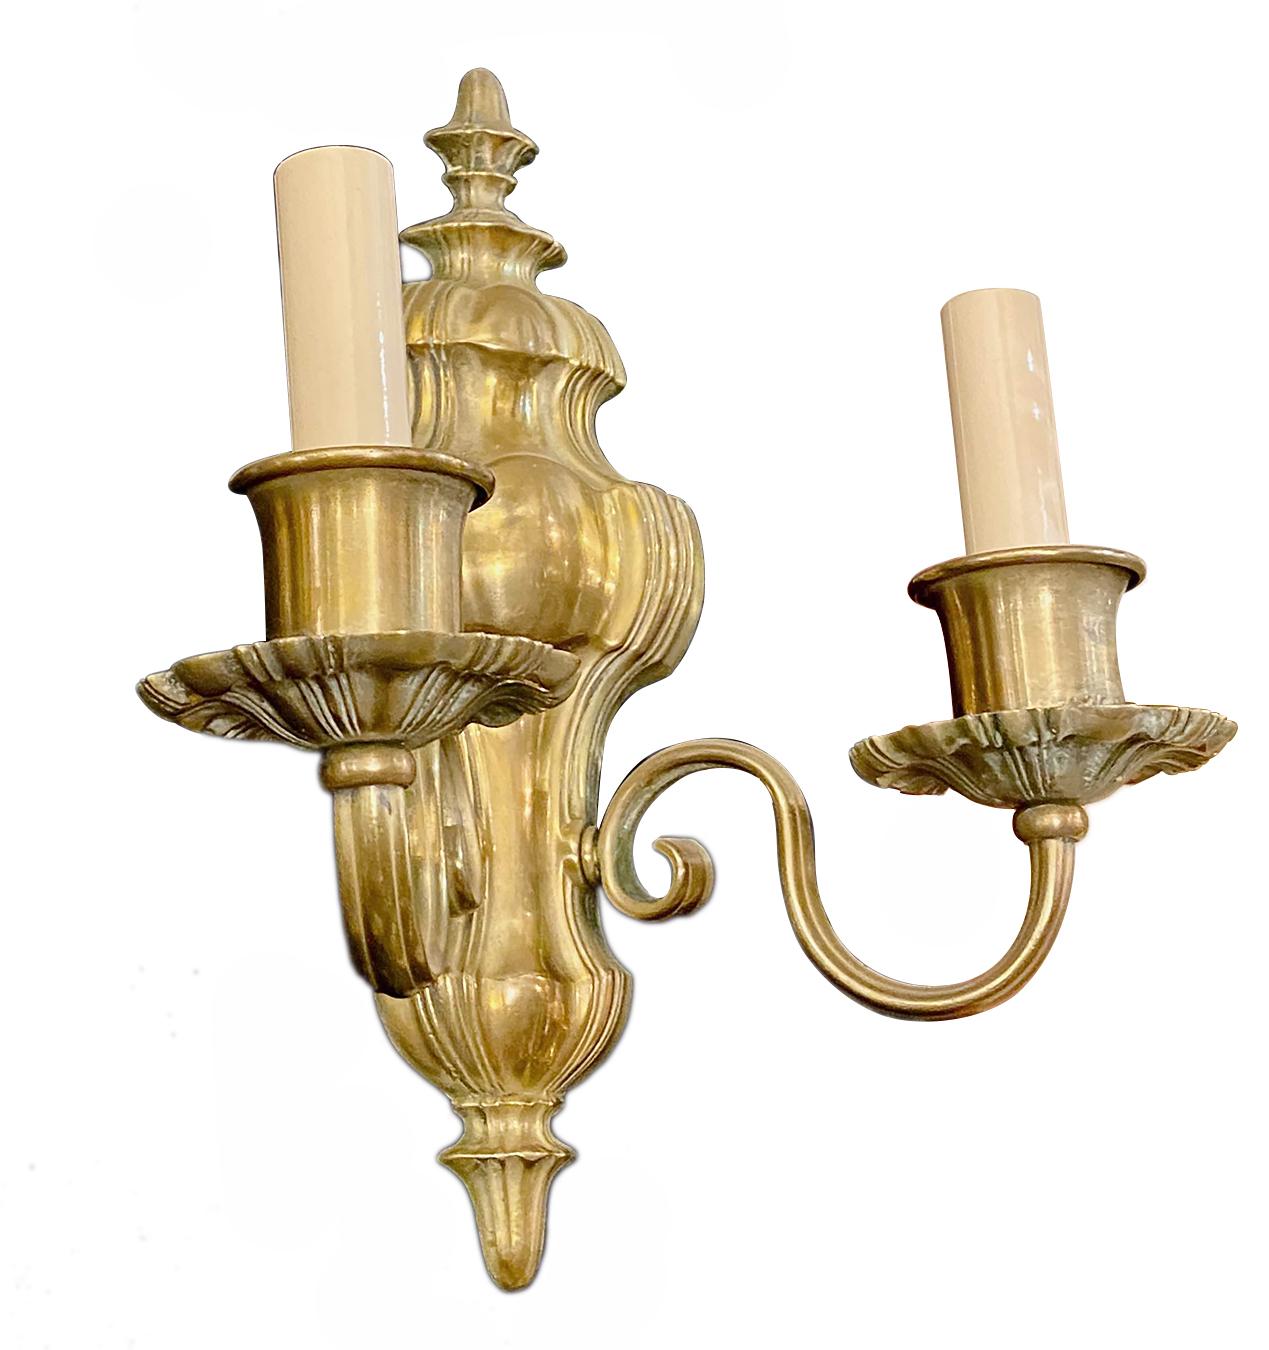 A pair of circa 1920s bronze Caldwell sconces in a neoclassic style.

Measurements:
Height 12